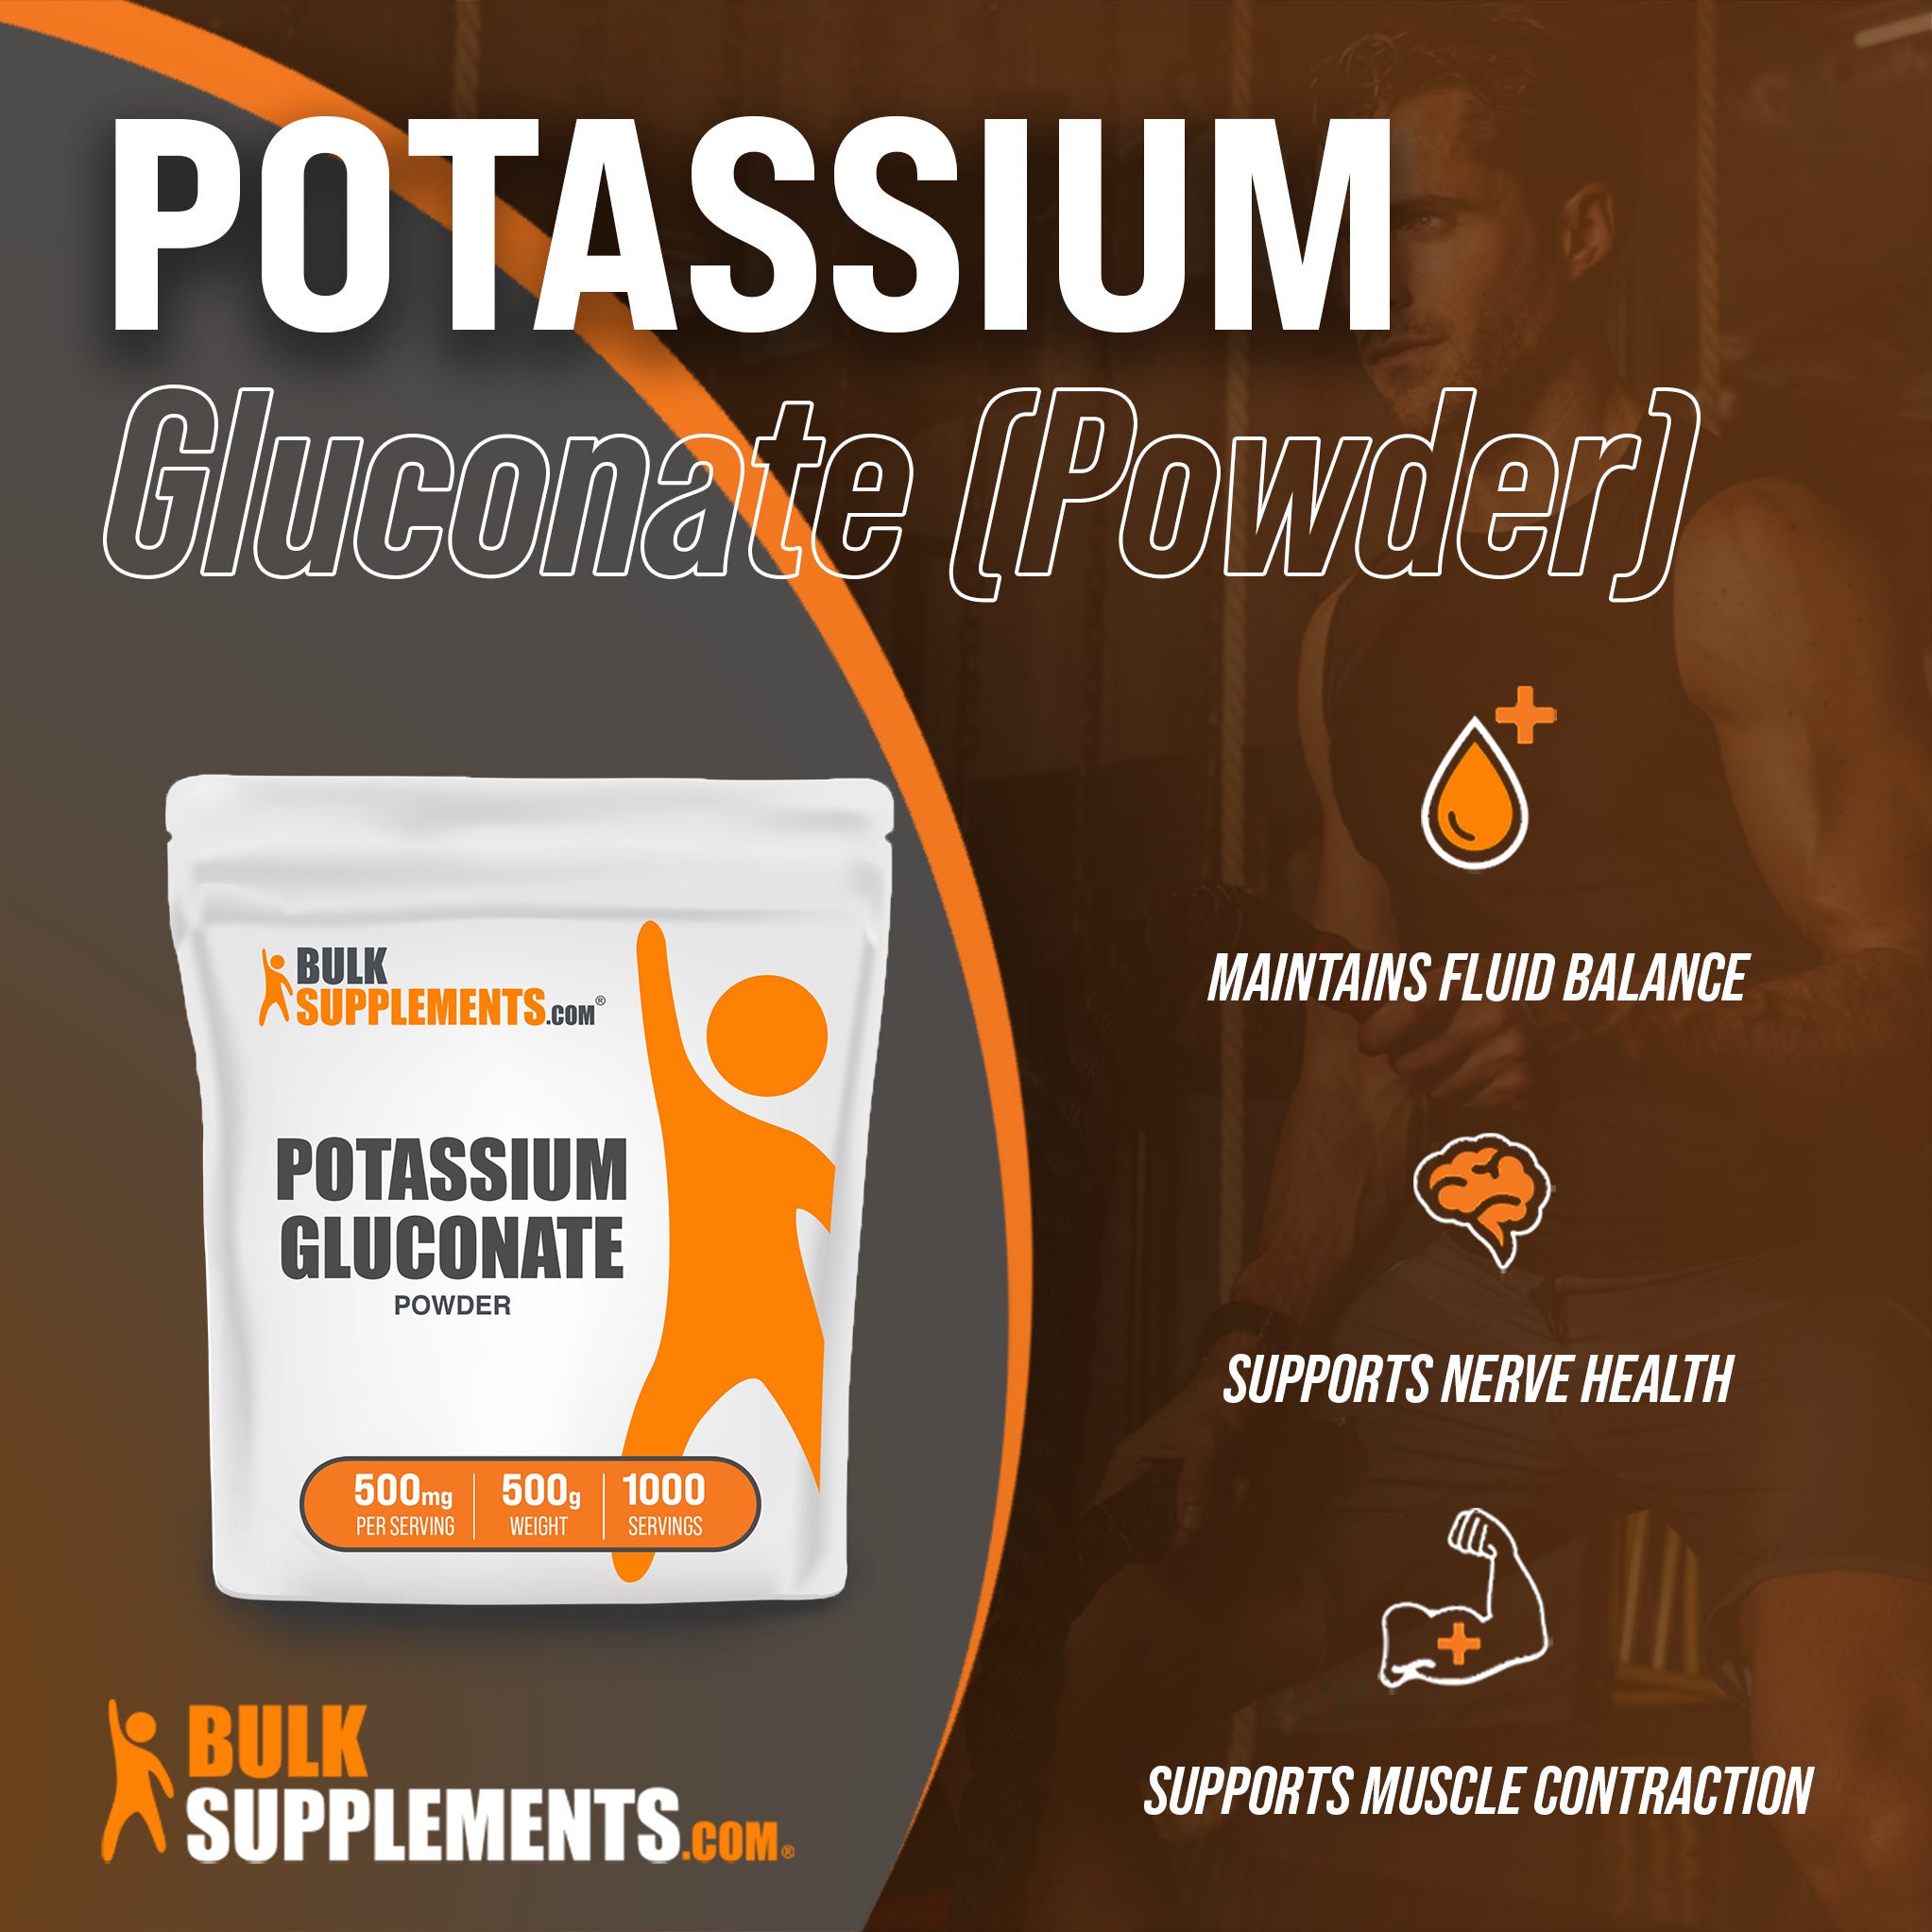 Benefits of Potassium Gluconate: maintains fluid balance, supports nerve health, supports muscle contraction